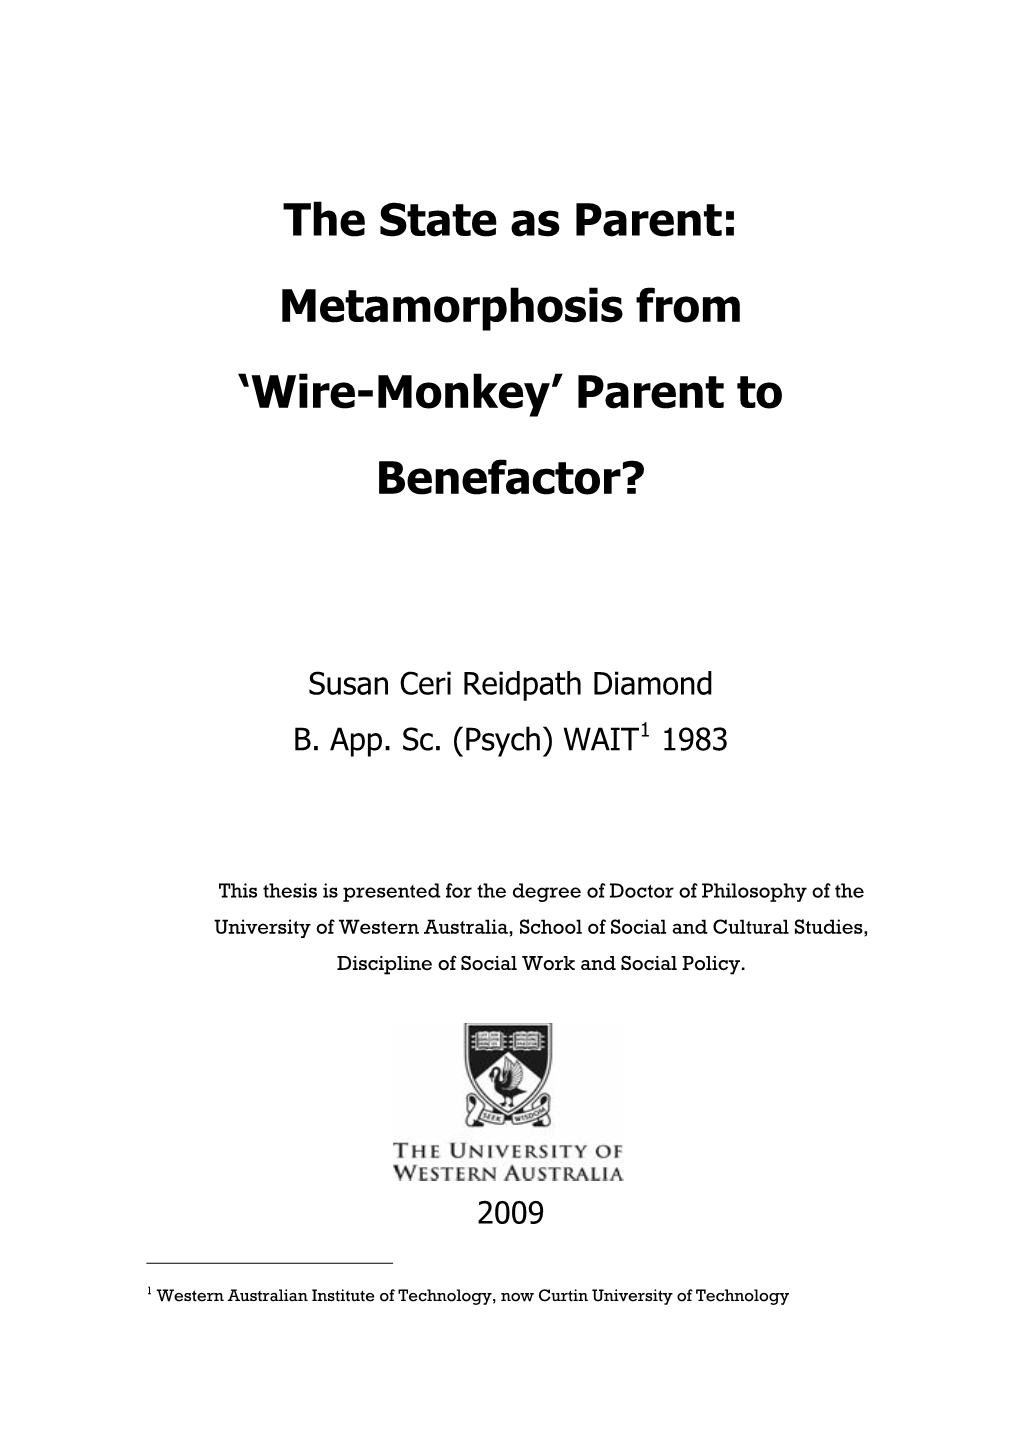 The State As Parent: Metamorphosis from 'Wire-Monkey'